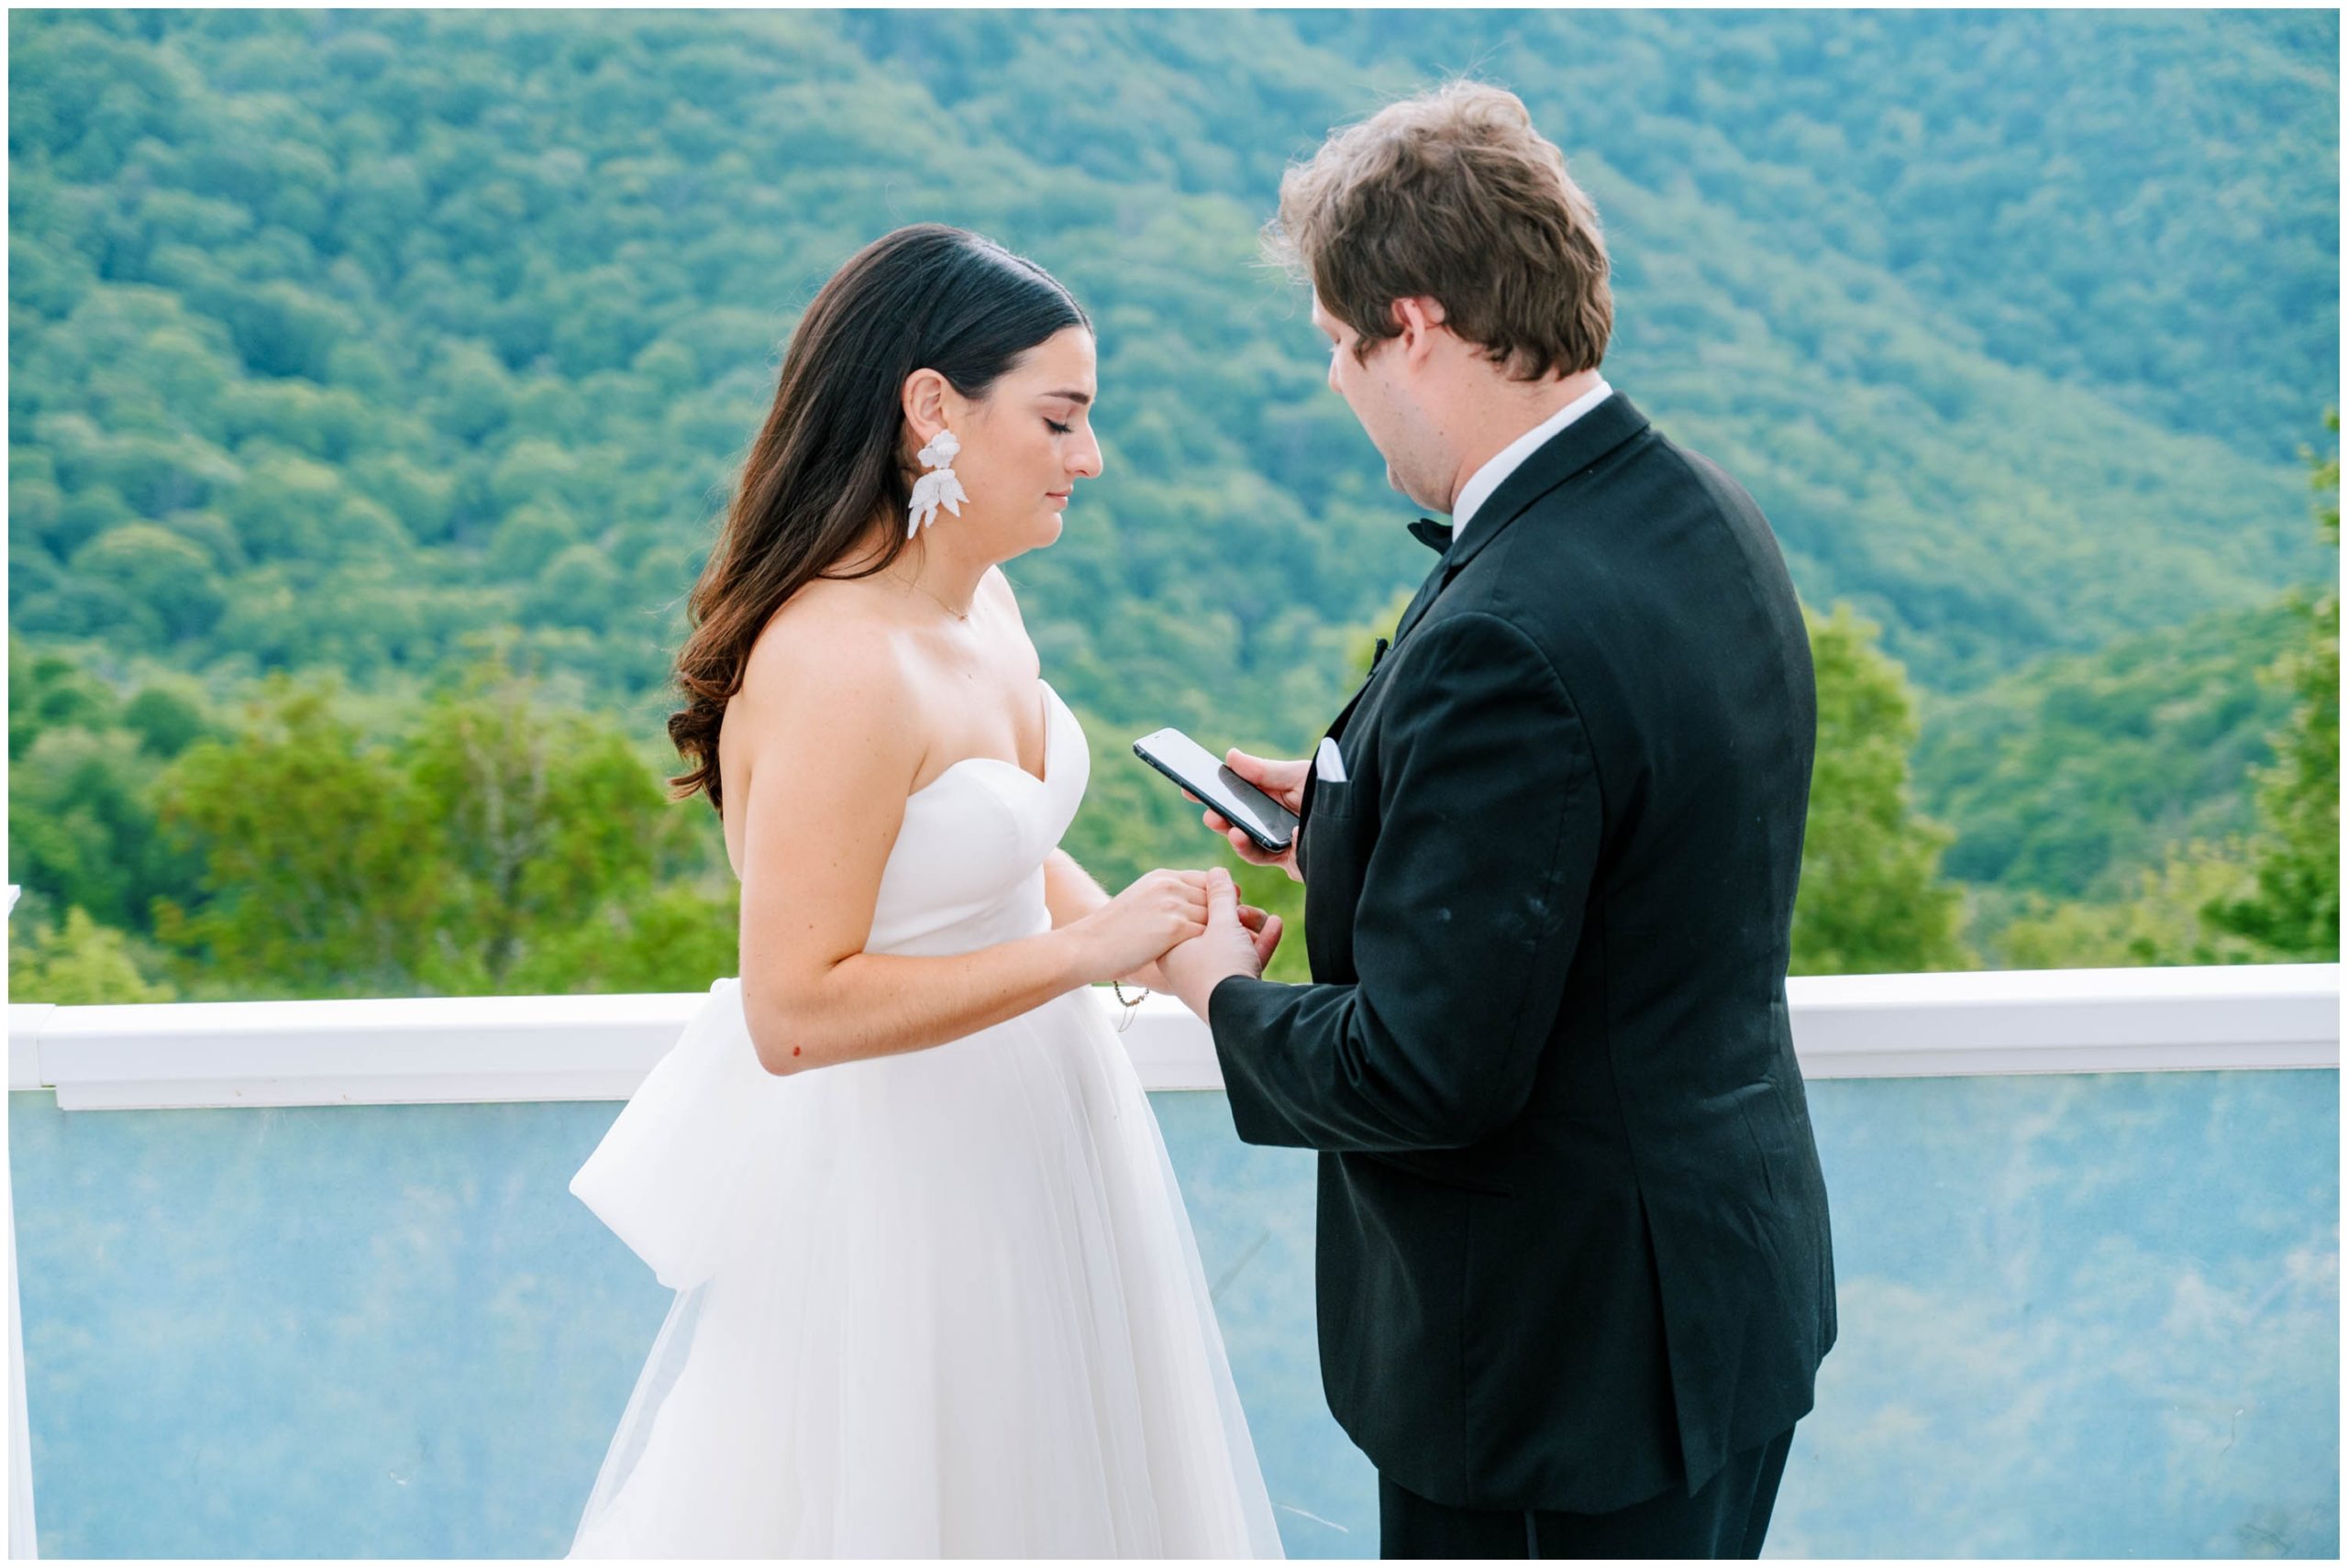 Bride and groom first look on a balcony overlooking the mountains